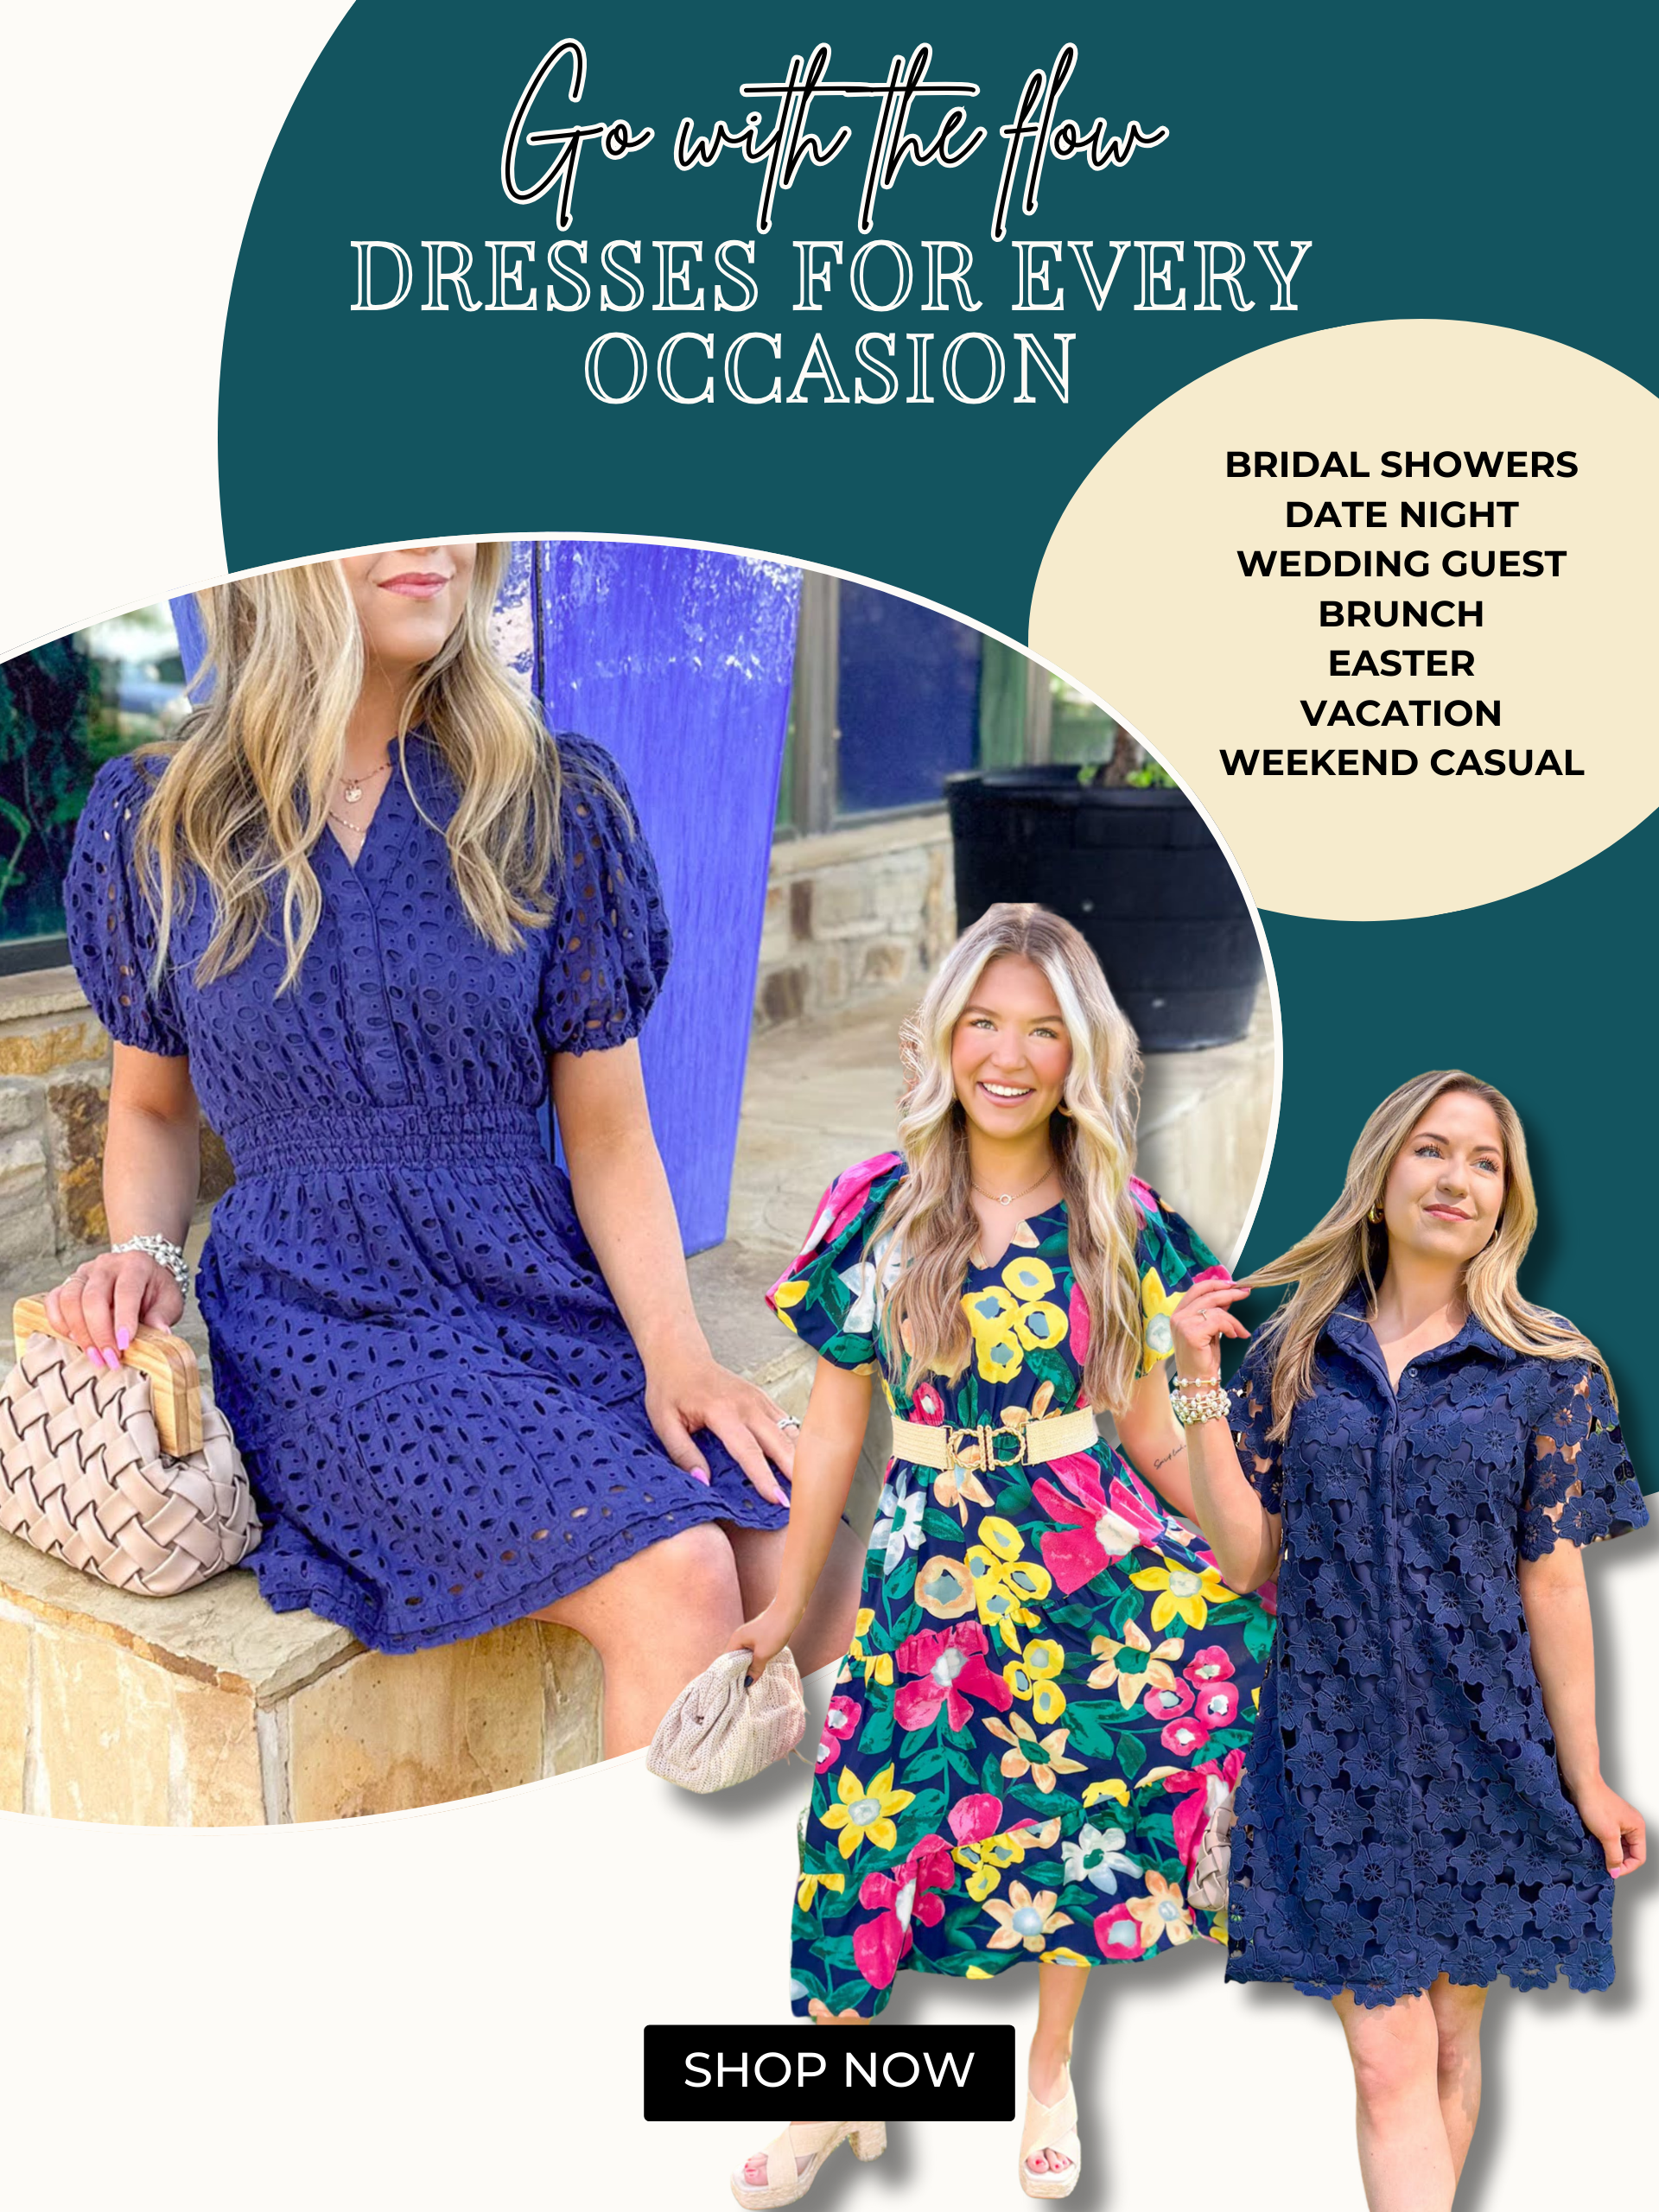 Go with the Flow. Dresses for Every Occasion: bridal showers, date night, wedding guest, easter, vacation and weekend casual. Models wearing navy dresses in different lengths with multiple textures and patterns.